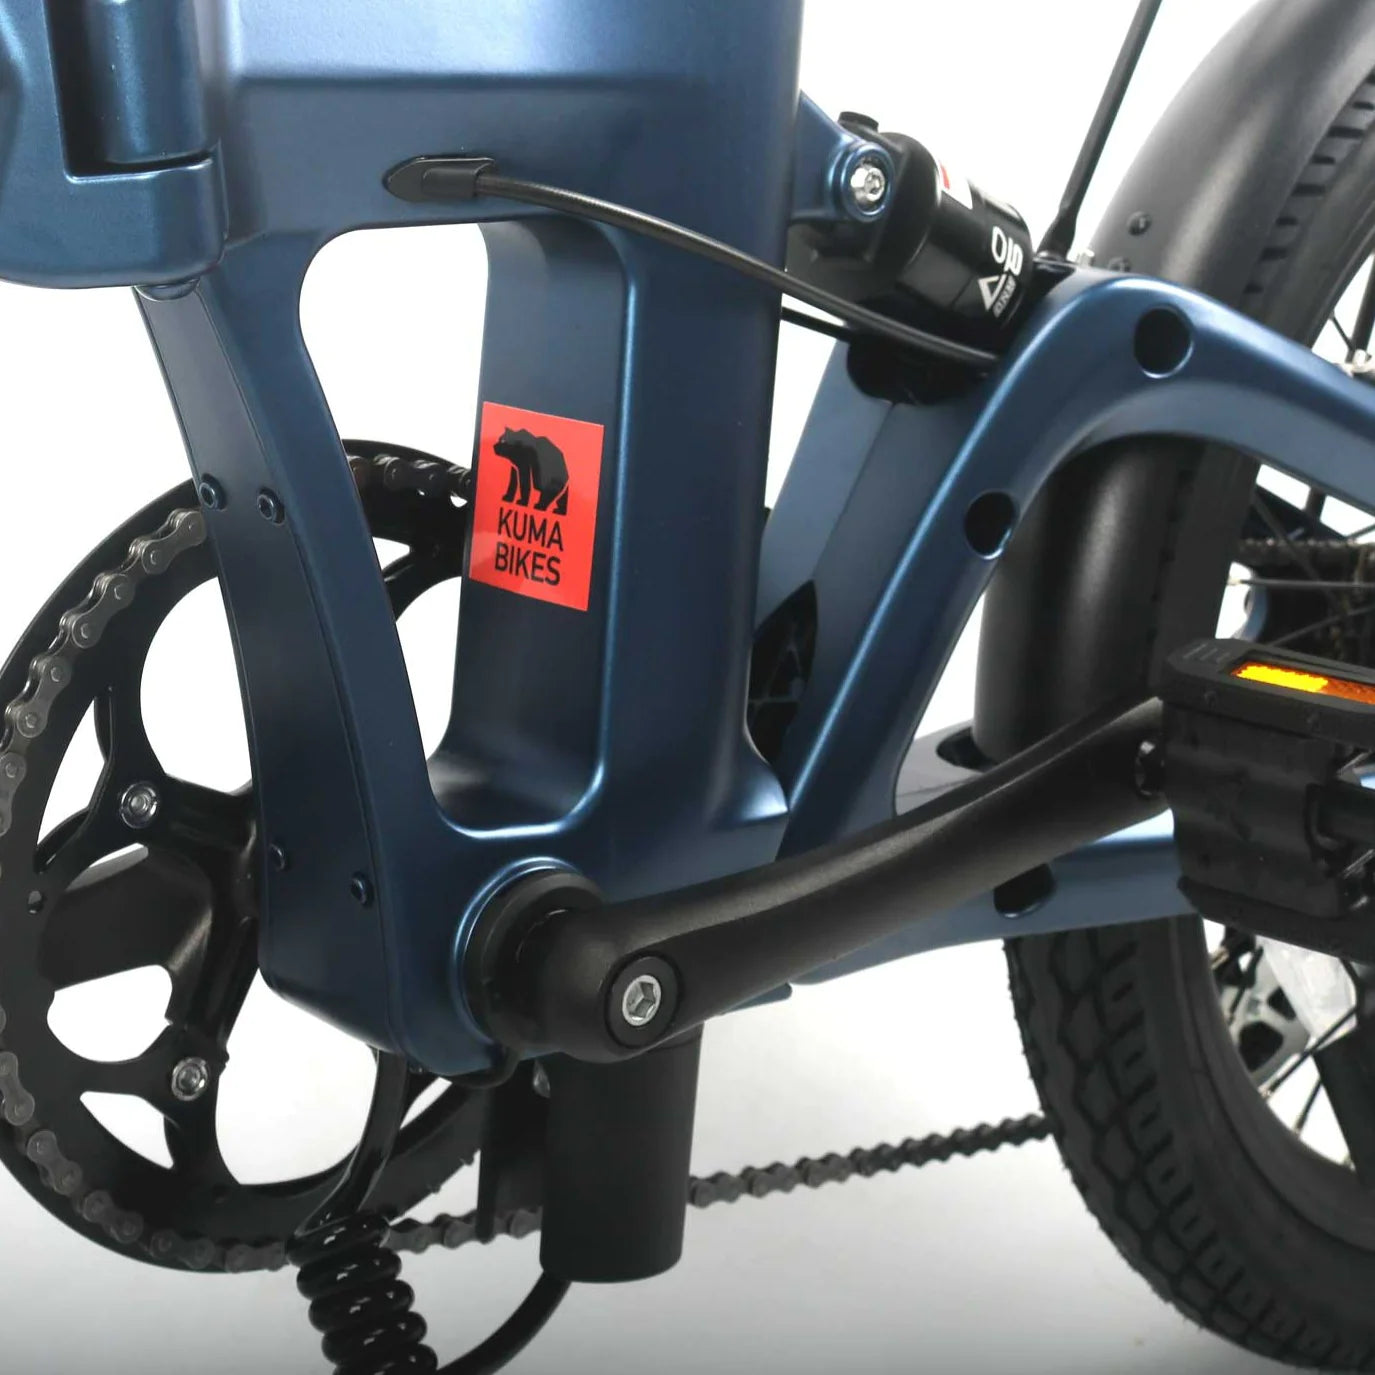 A close-up photo of the frame and hinge point of the Kuma F1 folding electric bike, which is available to buy from Bleeper.